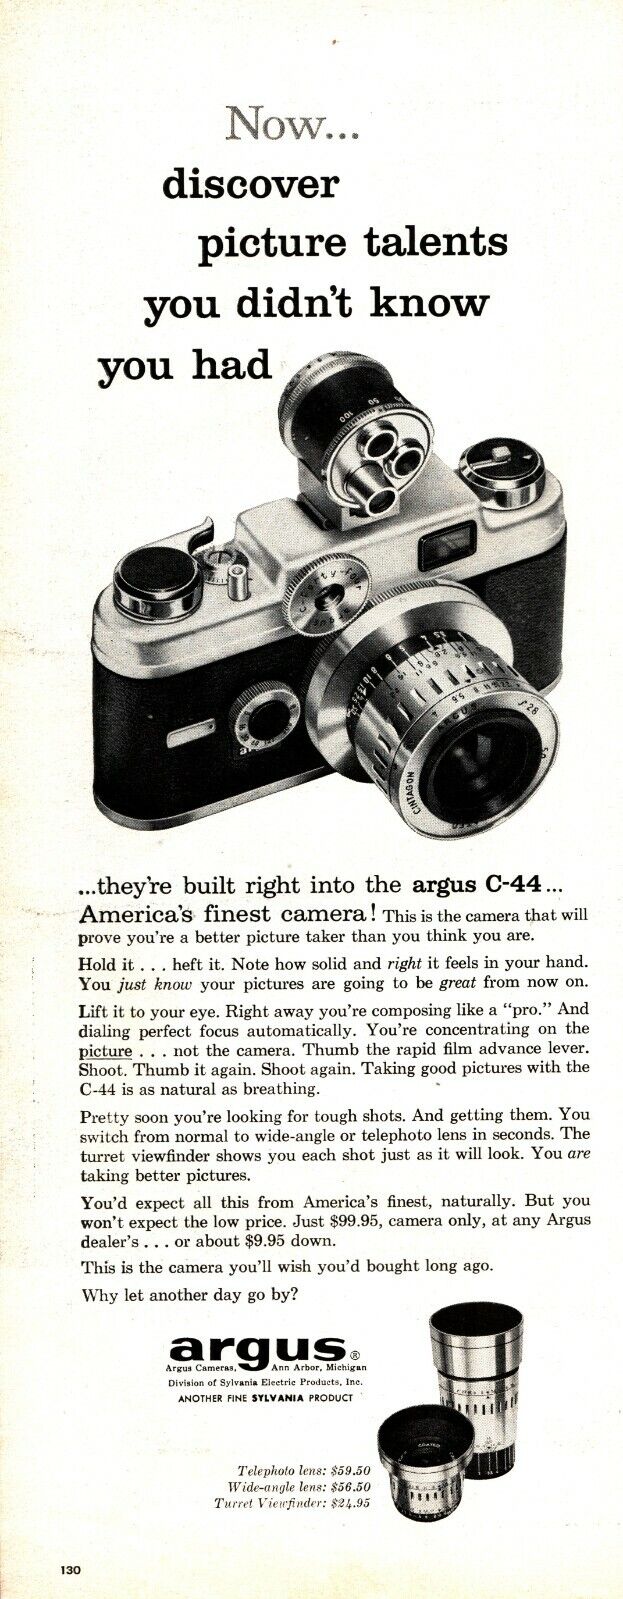 1958 Argus Camera Vintage Print Ad Discover Picture Talents You Didn't Know 